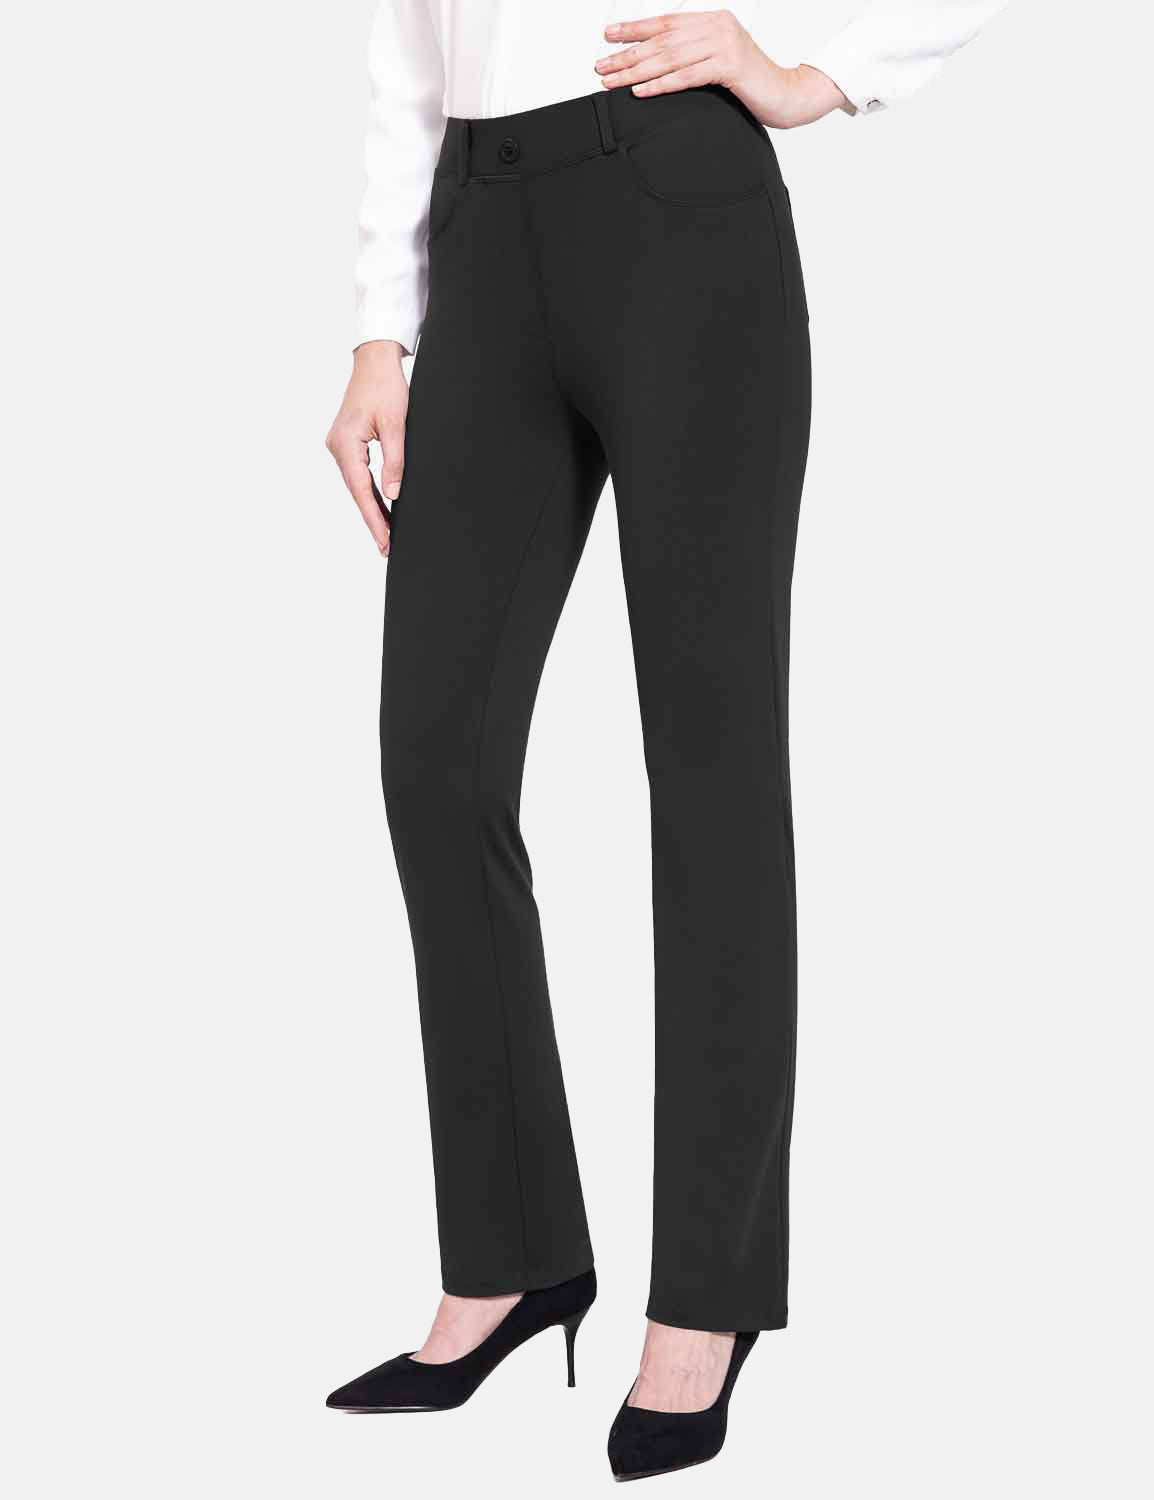 Buy Balleay Art Black Pants for Women Zipper Stretch Work Pants Casual  Straight Leg Pants with Pockets, Black, Large at